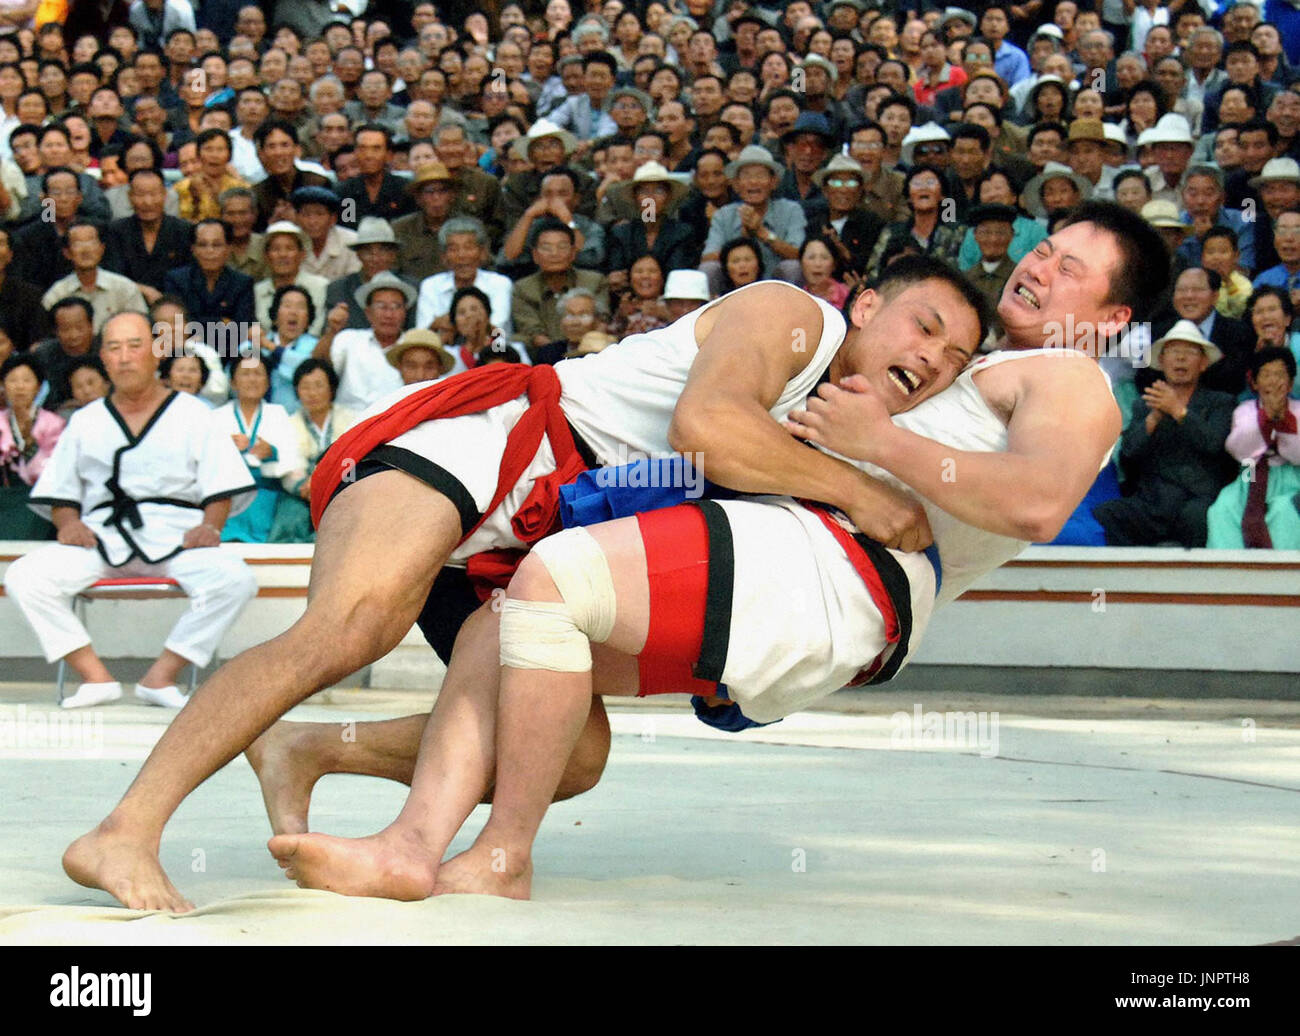 PYONGYANG, North Korea - Ri Jo Won (L) from North Phyongan Province in North Korea battles in a national ''ssirum,'' or Korean wrestling, tournament in Pyongyang on Sept. 25, 2009. Ri, 30, came first at the catch-weight event in which 20 grapplers competed. (Kyodo) Stock Photo